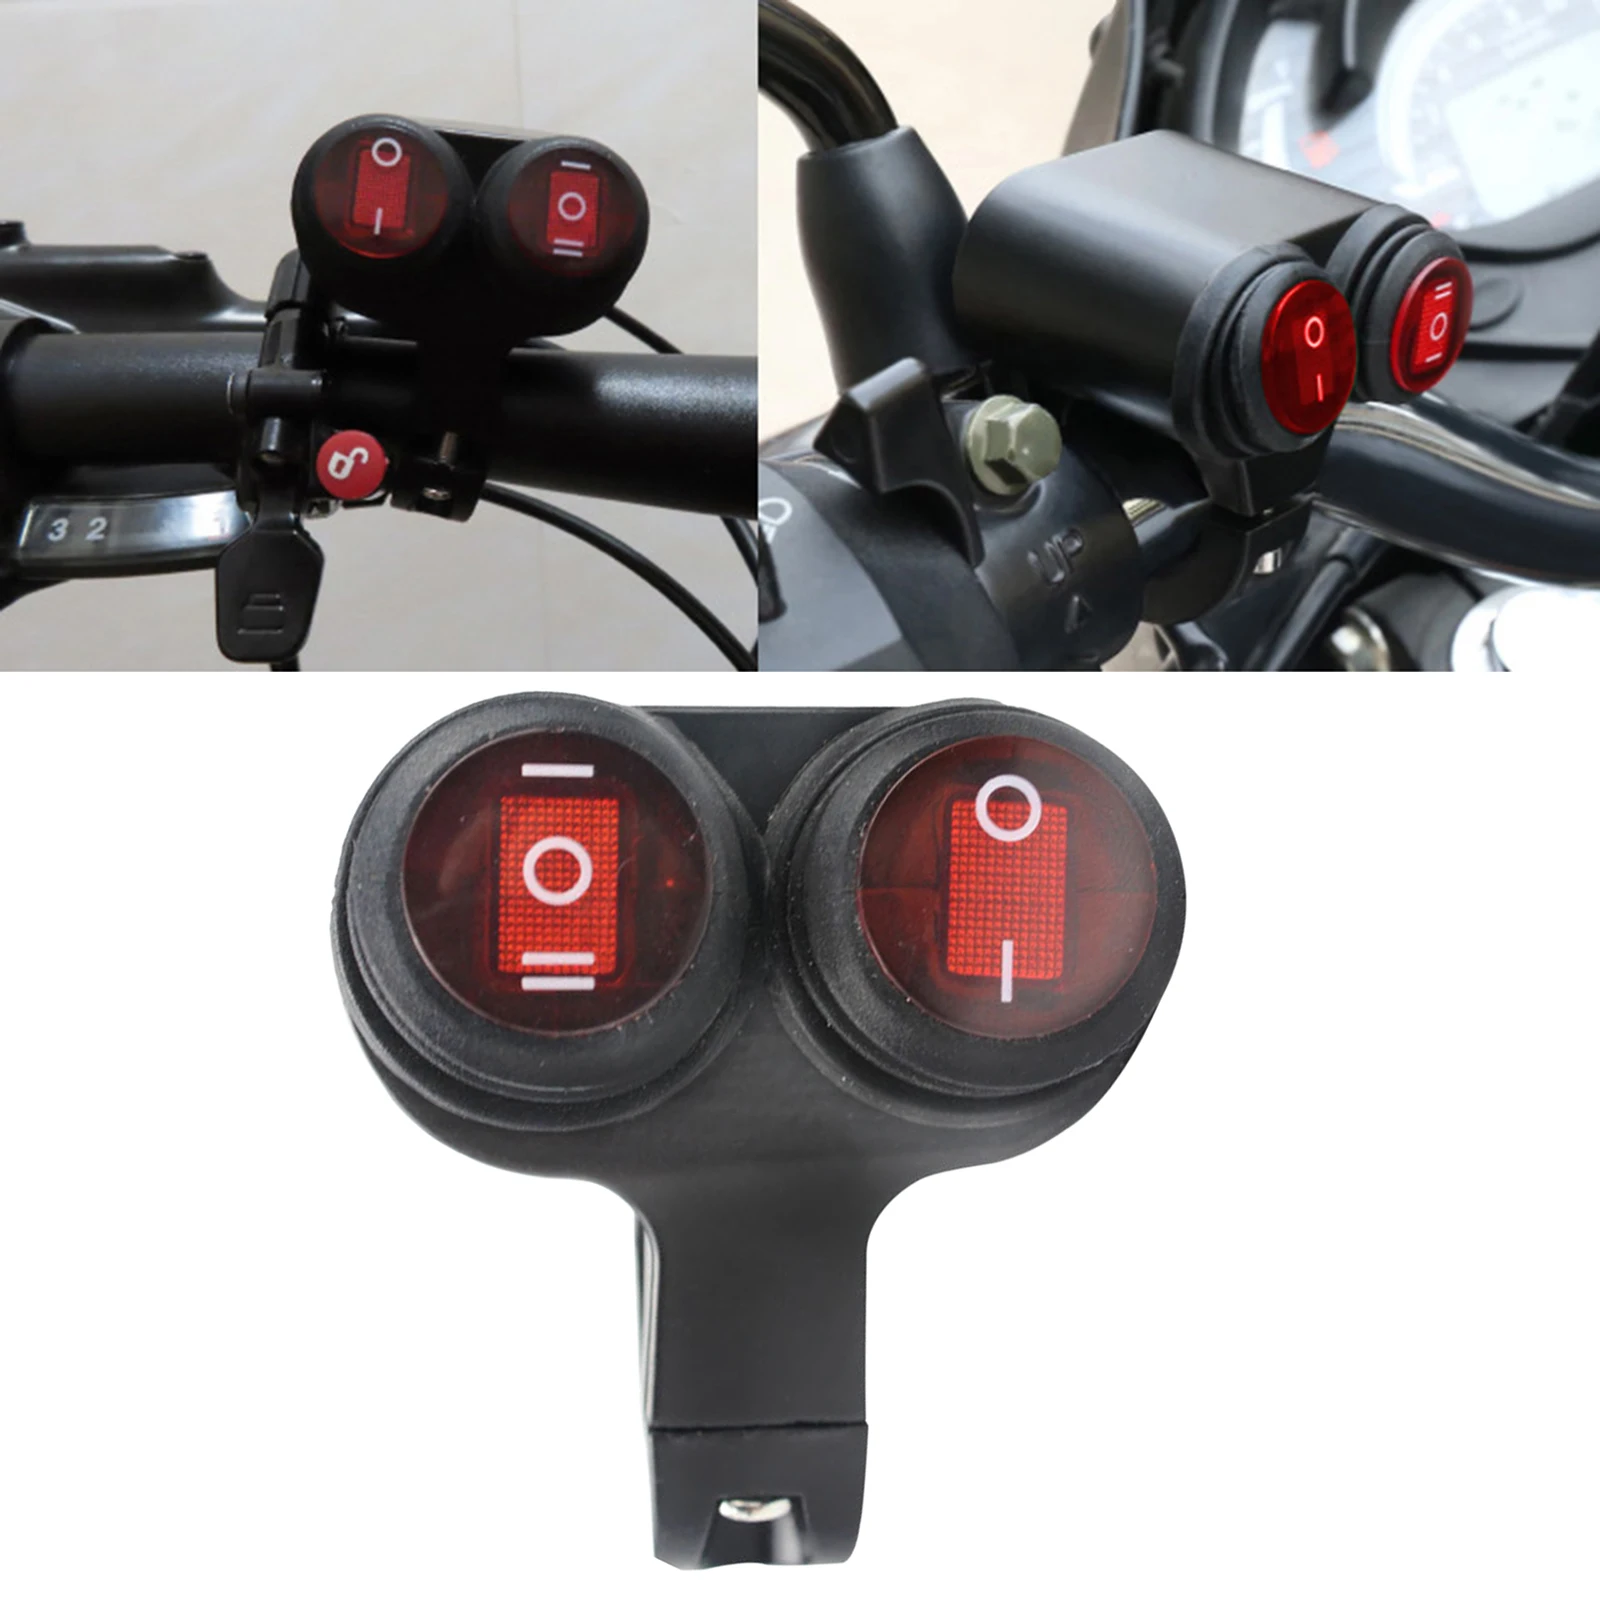 12V 10A Waterproof Motorcycle 7/8 Inch 22mm Handlebar Double Control Button Switch Headlight Fog Light Switches Red Light